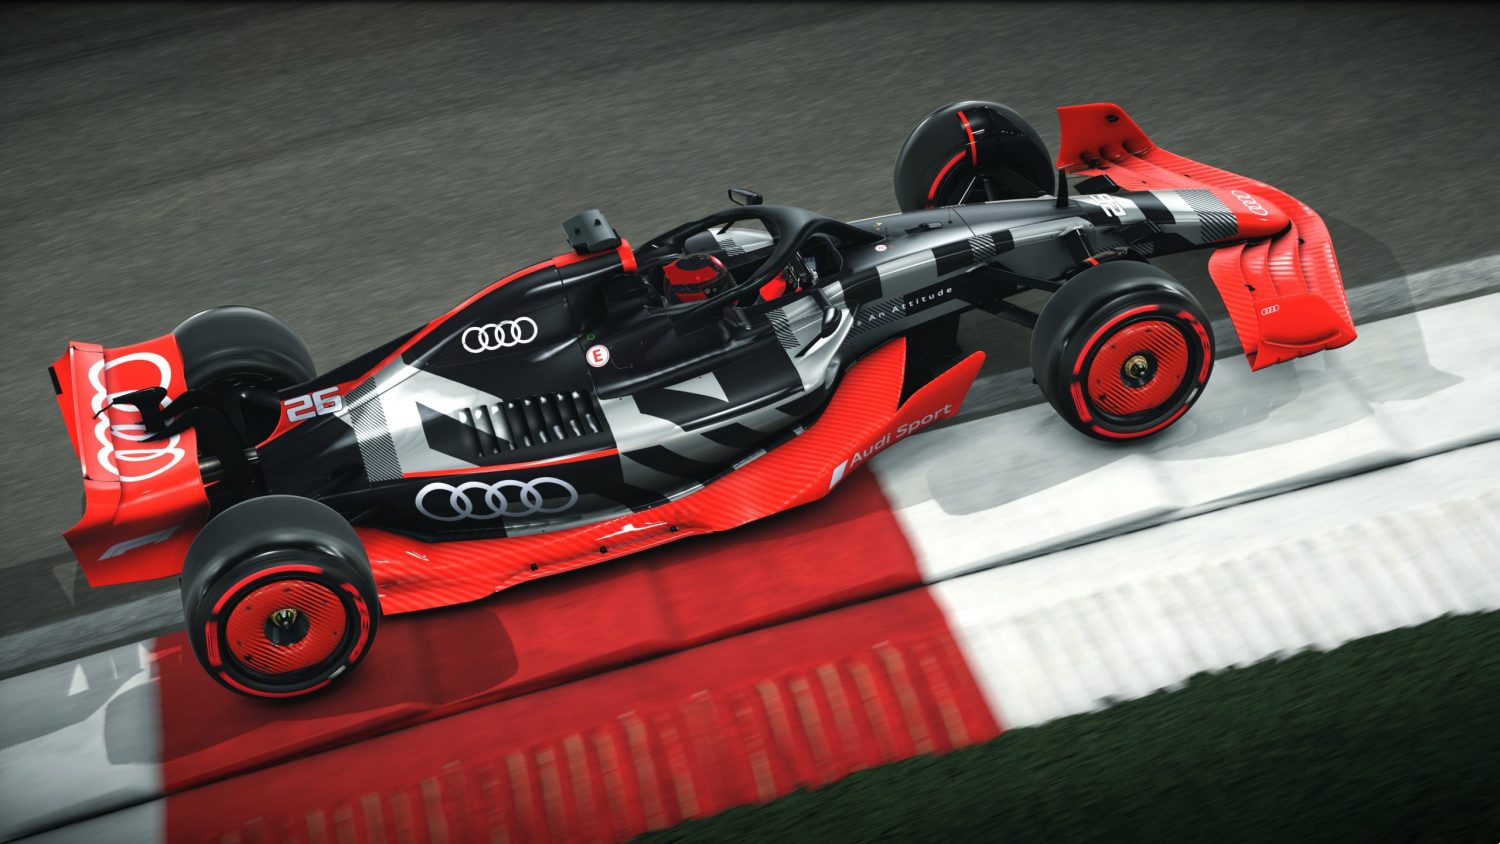 The former F1 racer considers Audi as a title challenge